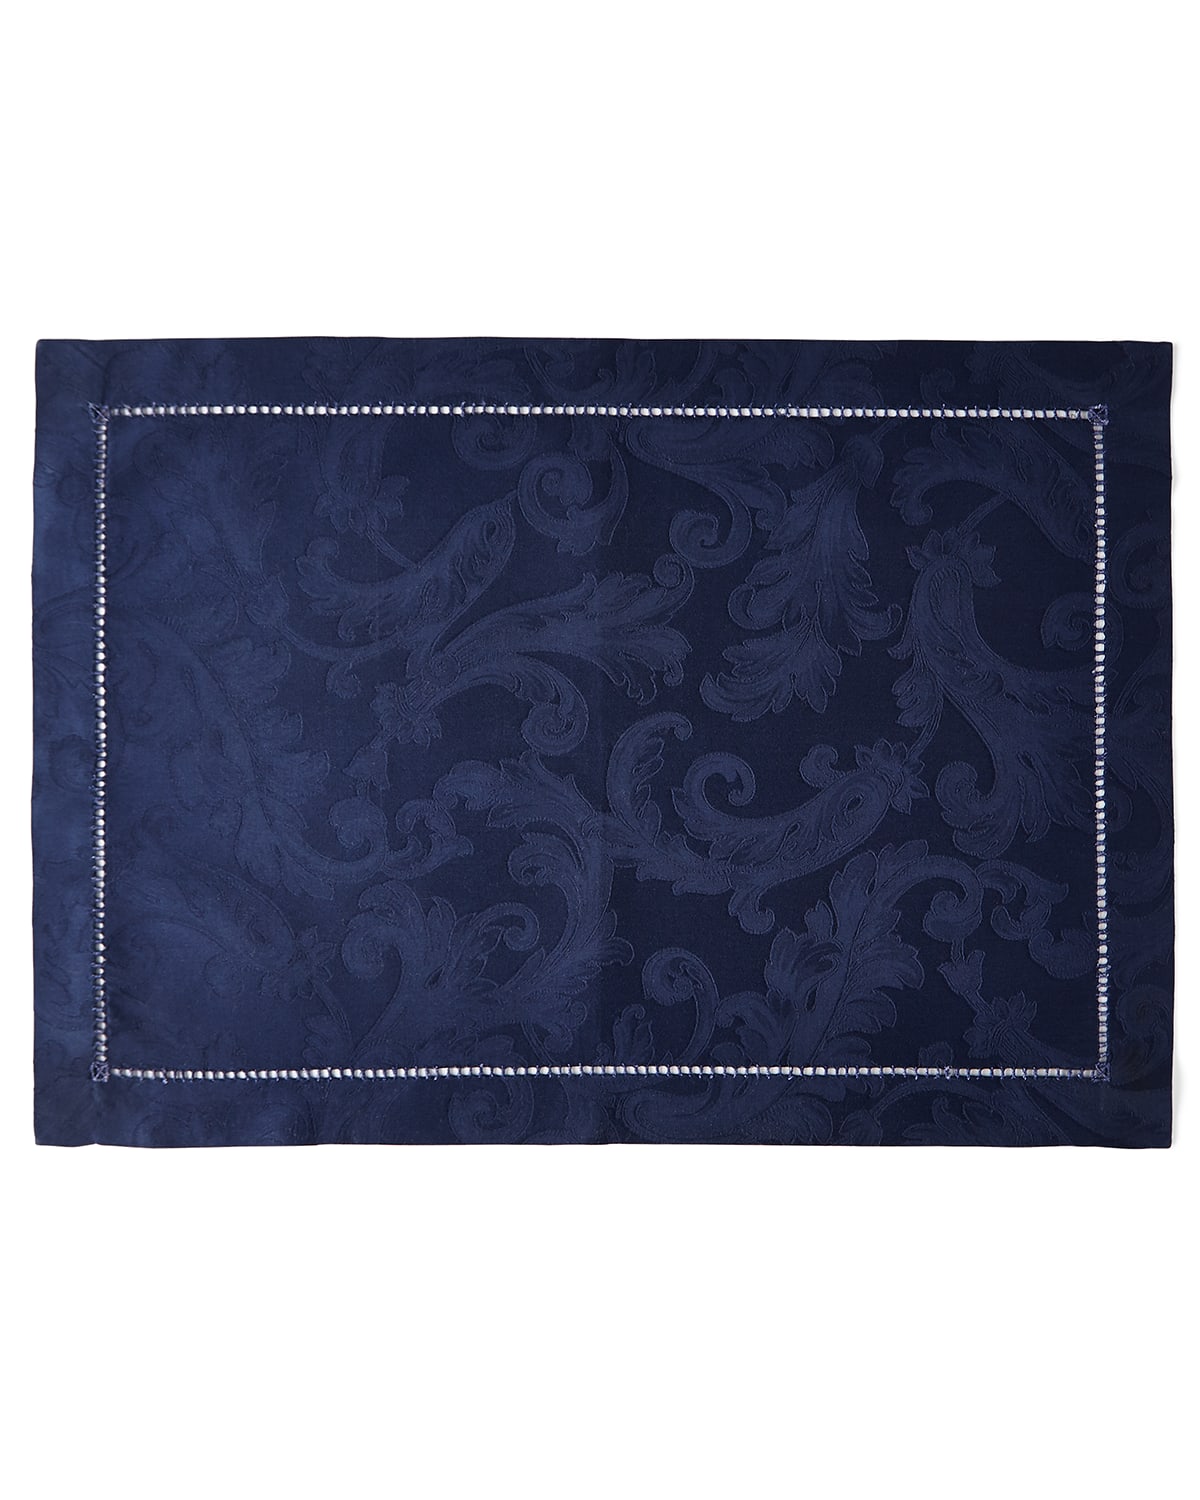 Sferra Plume Jacquard Placemats, Set Of 4 In Blue